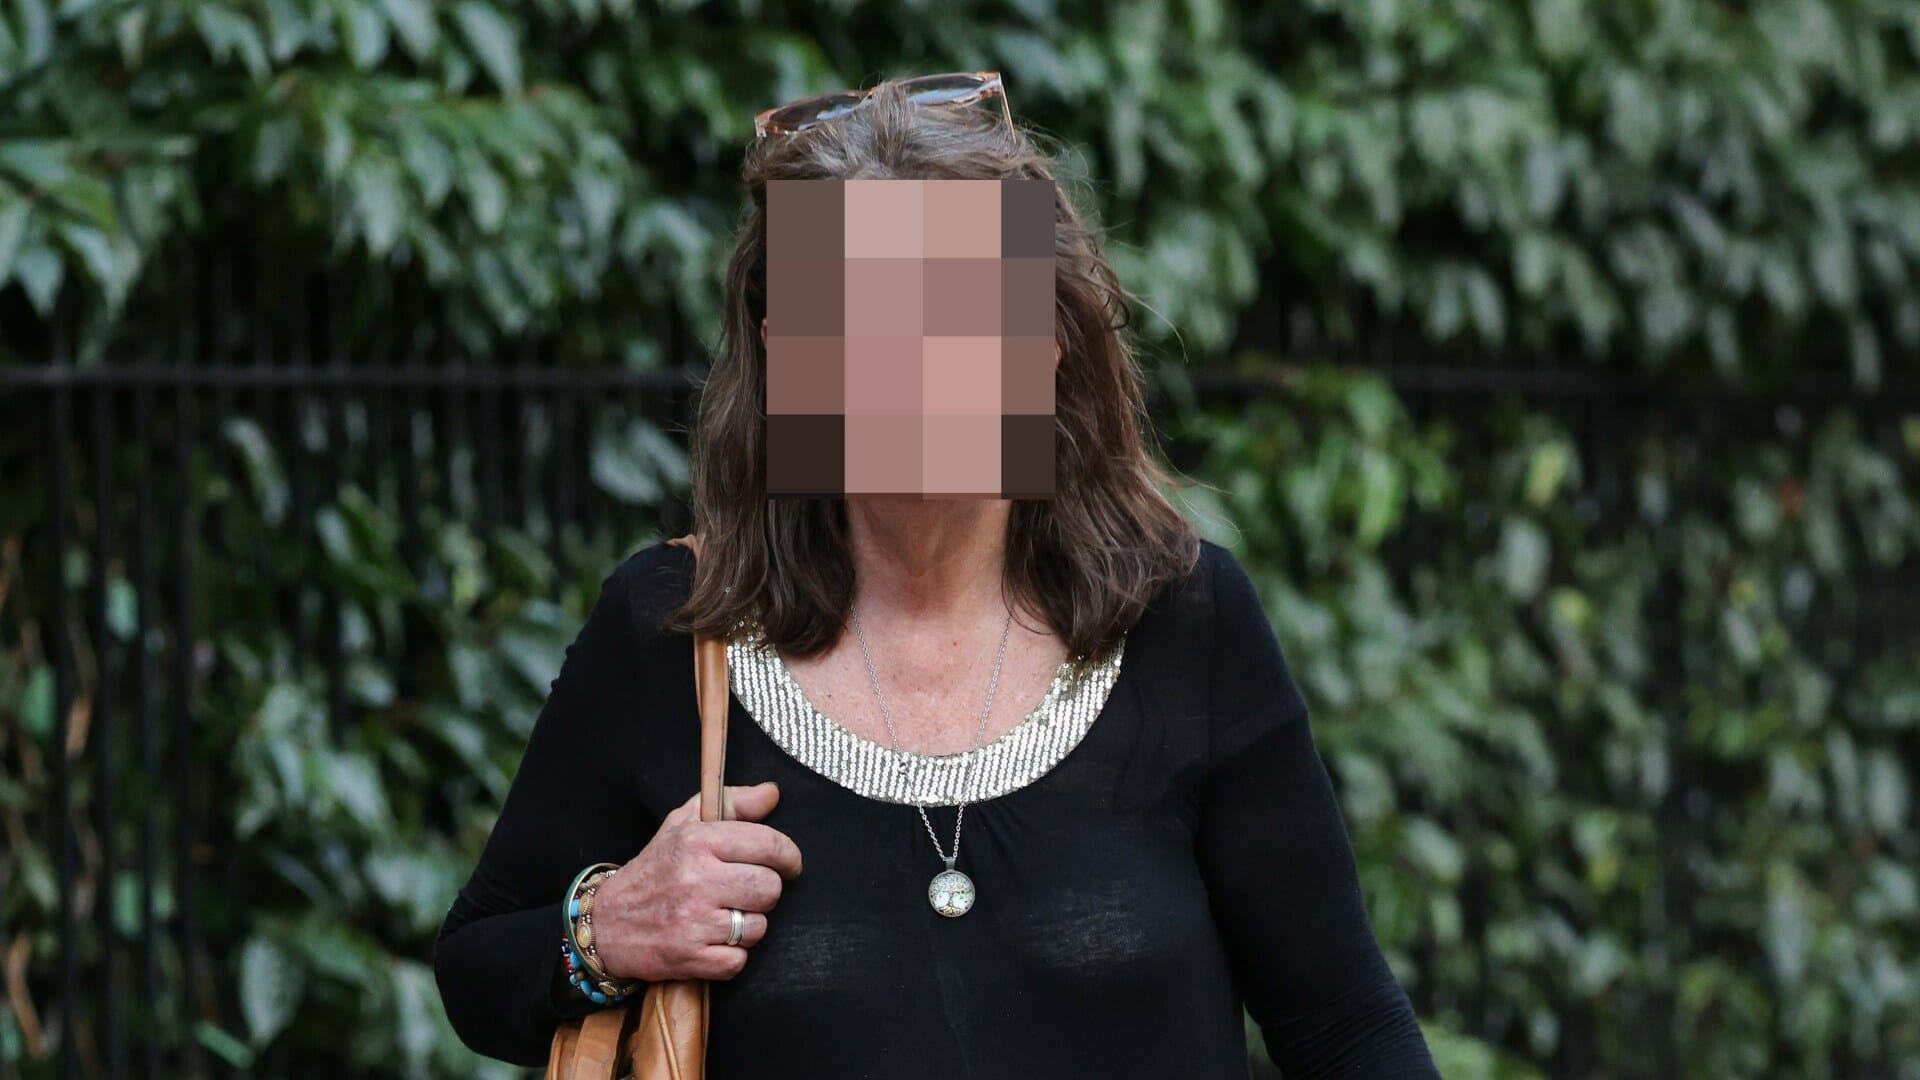 I steal luxury goods including steaks & champagne for rich clients - I earn £500 a day, reveals shameless gran